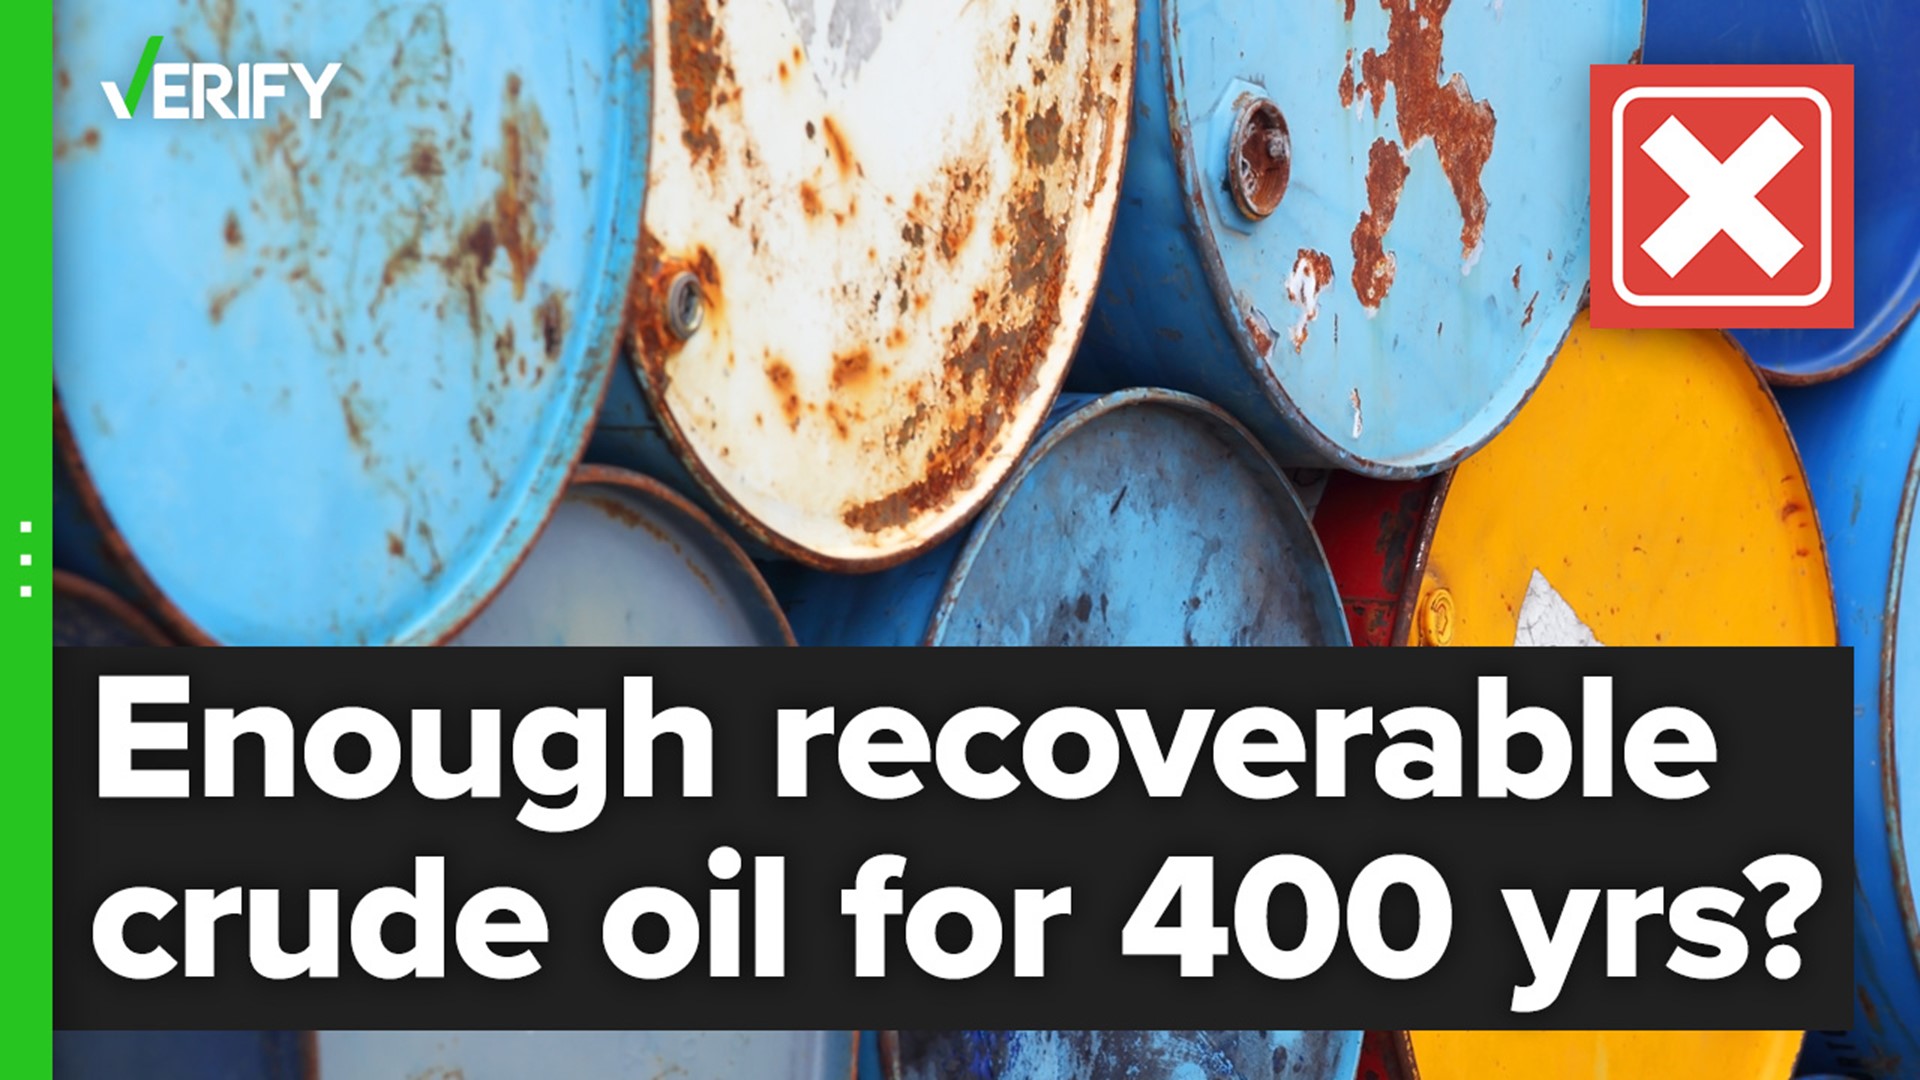 A viral copy-and-paste chain message falsely claims there is enough recoverable crude oil in the U.S. to supply future demand for more than 400 years.